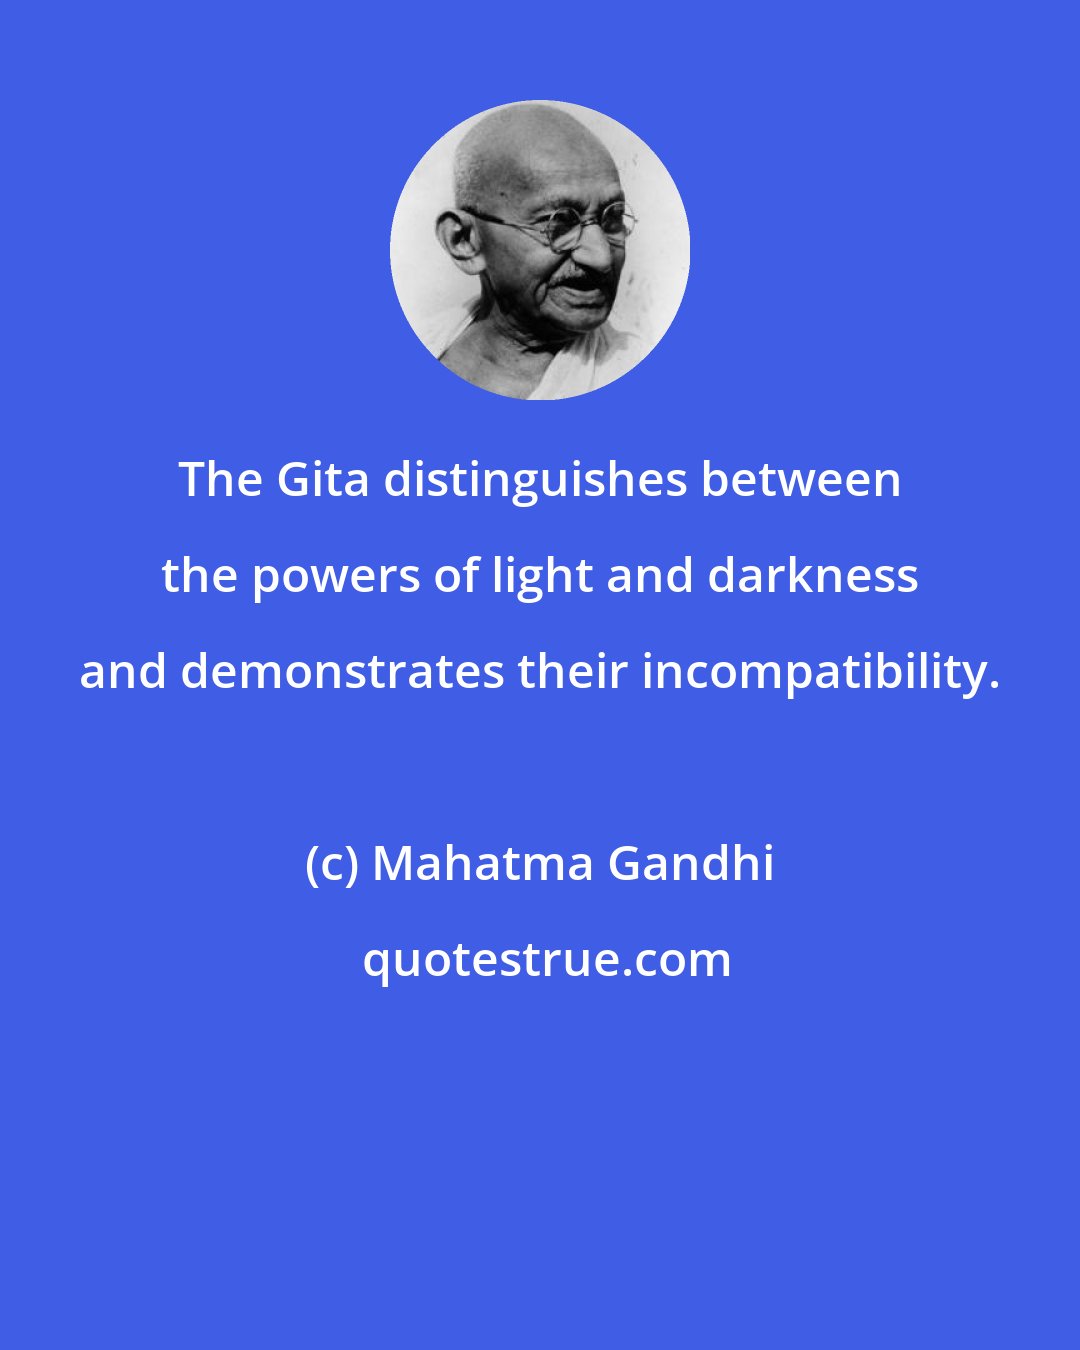 Mahatma Gandhi: The Gita distinguishes between the powers of light and darkness and demonstrates their incompatibility.